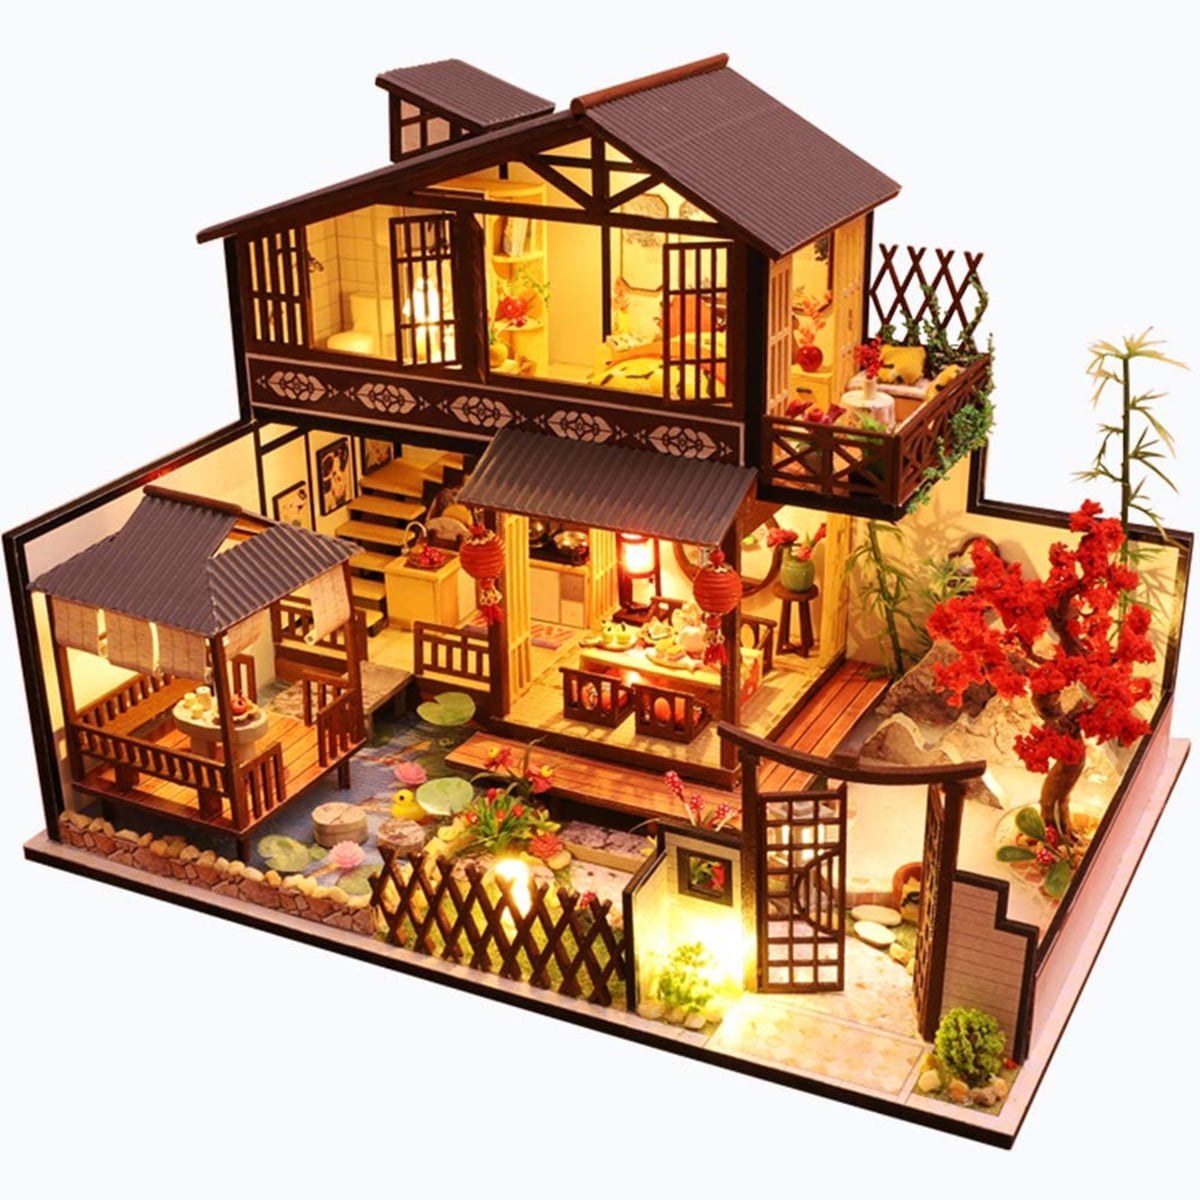 Cute room DIY Youth ever Wooden Miniature Dollhouse Kit Creative Gift Toys 